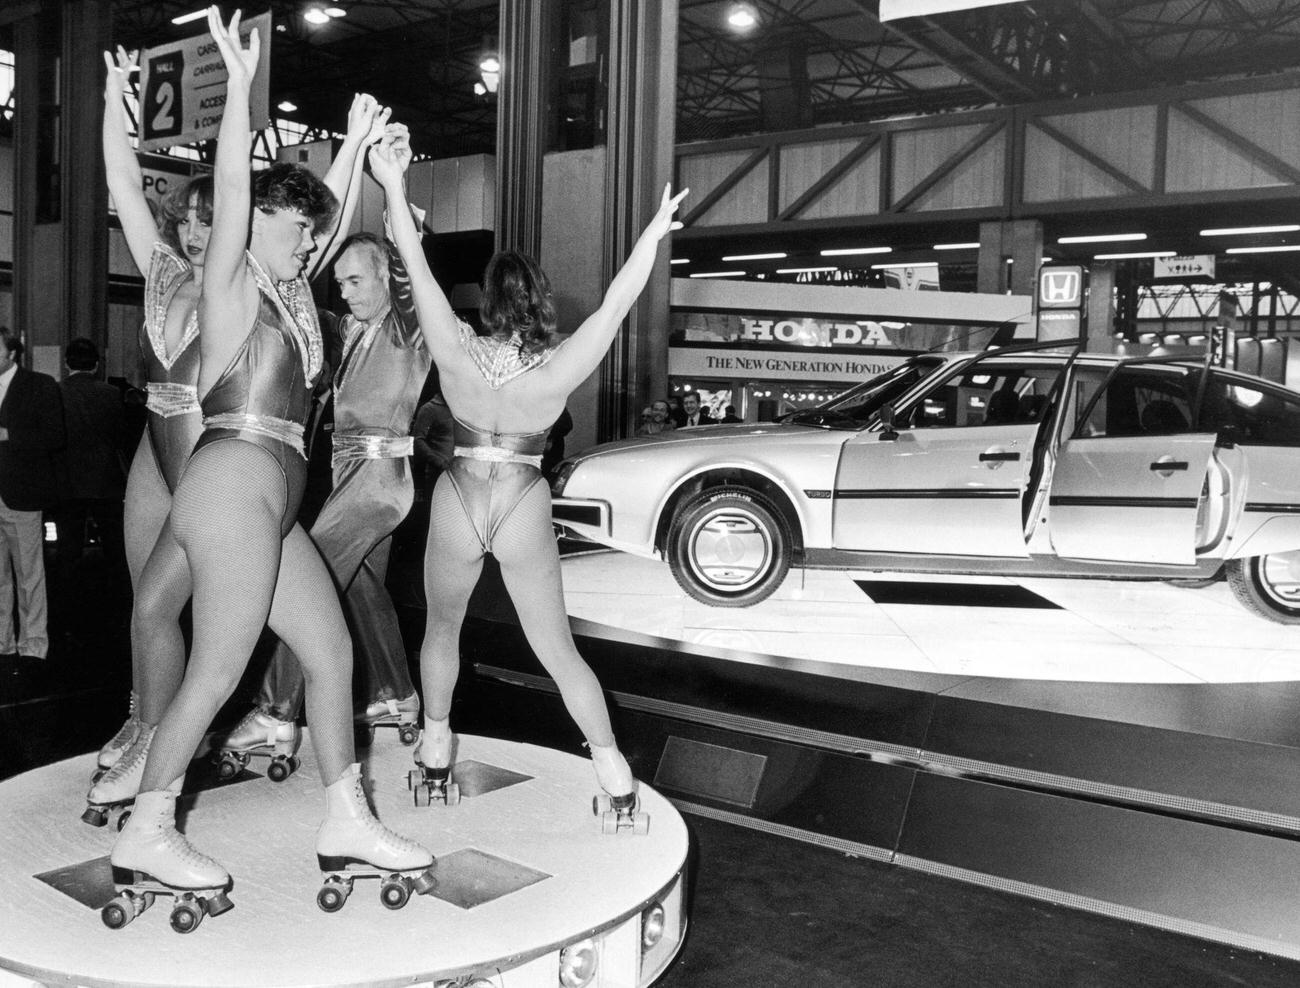 The Skating Germaine Perform at 1984 Motor Show, 1984